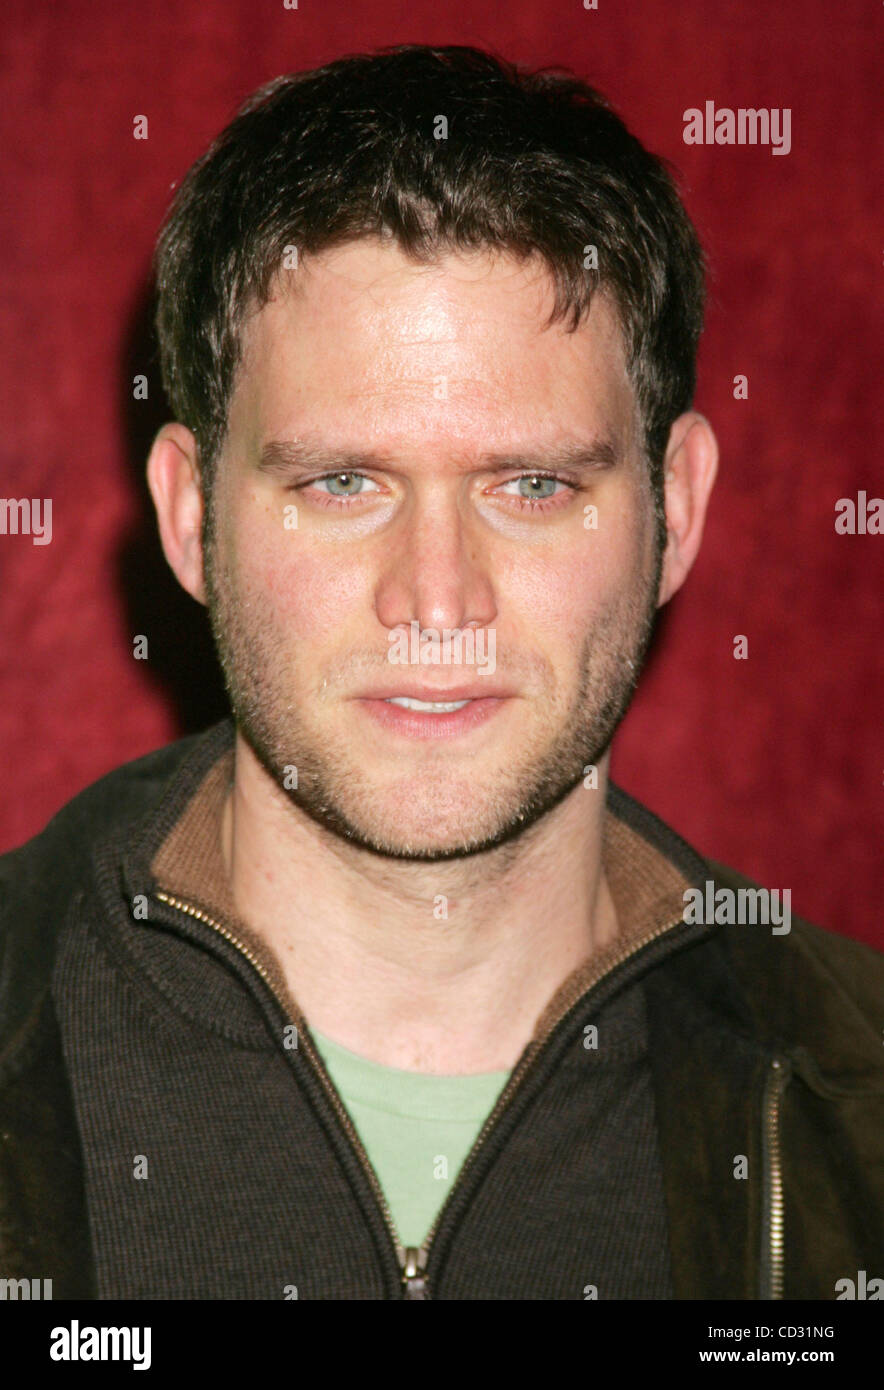 Apr 02, 2008 - New York, NY, USA - Actor STEVEN PASQUALE at the New York premiere of 'Diminished Capacity' held at the Opening Night of the Gen Art Film Festival at the Ziegfeld Theater. (Credit Image: © Nancy Kaszerman/ZUMA Press) Stock Photo